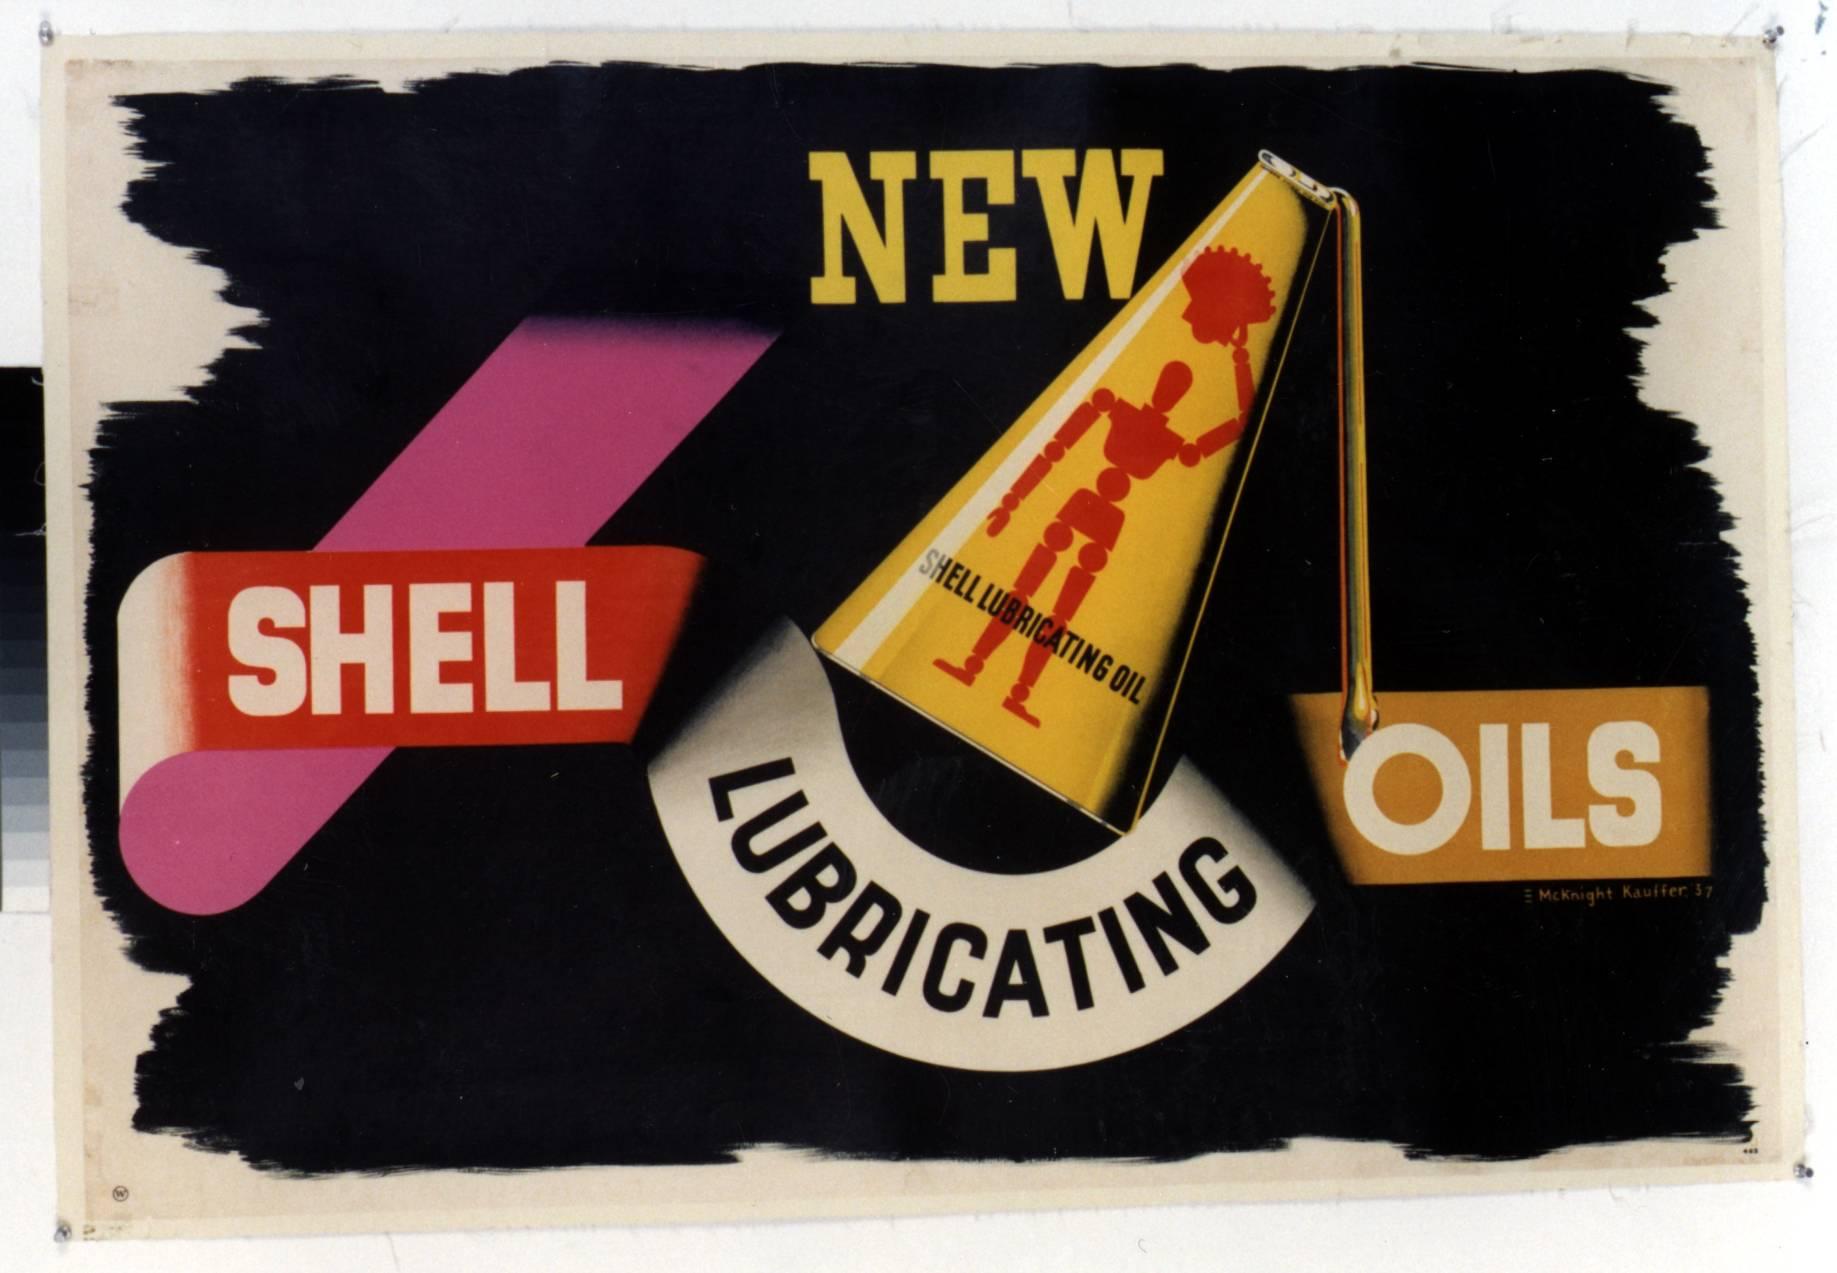 NEW / SHELL LUBRICATING OILS. 